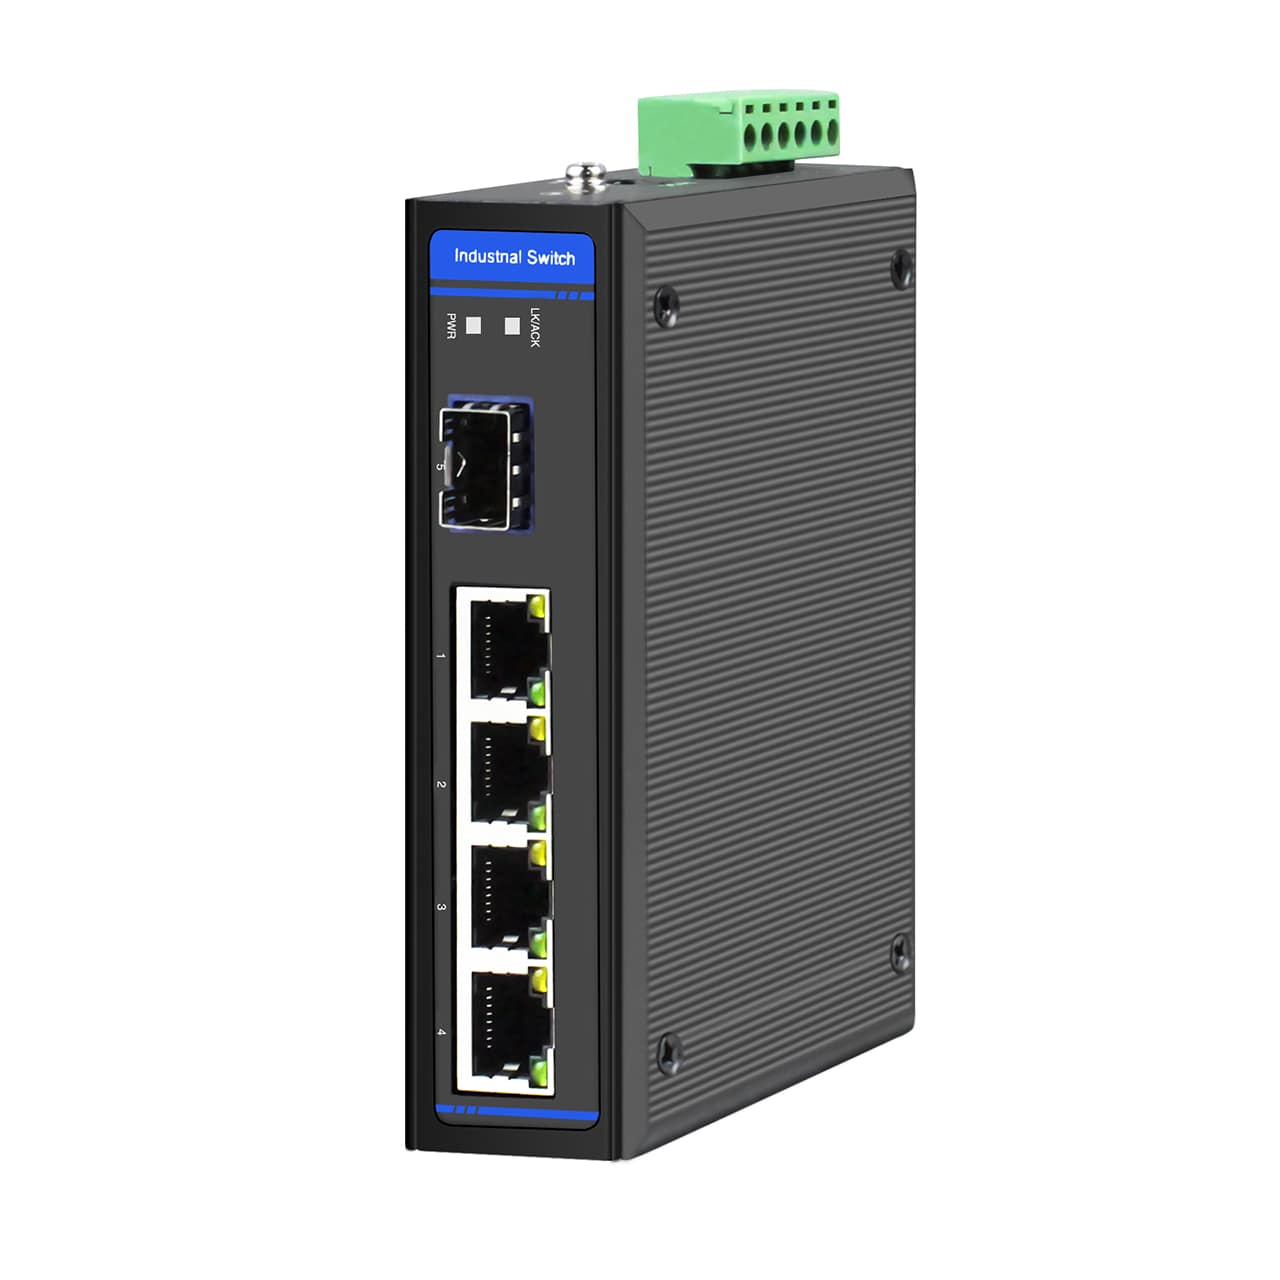 Industrial Ethernet Switch with Fiber 4x10/100/1000Base-TX + 1x100/1000Base-FX SFP